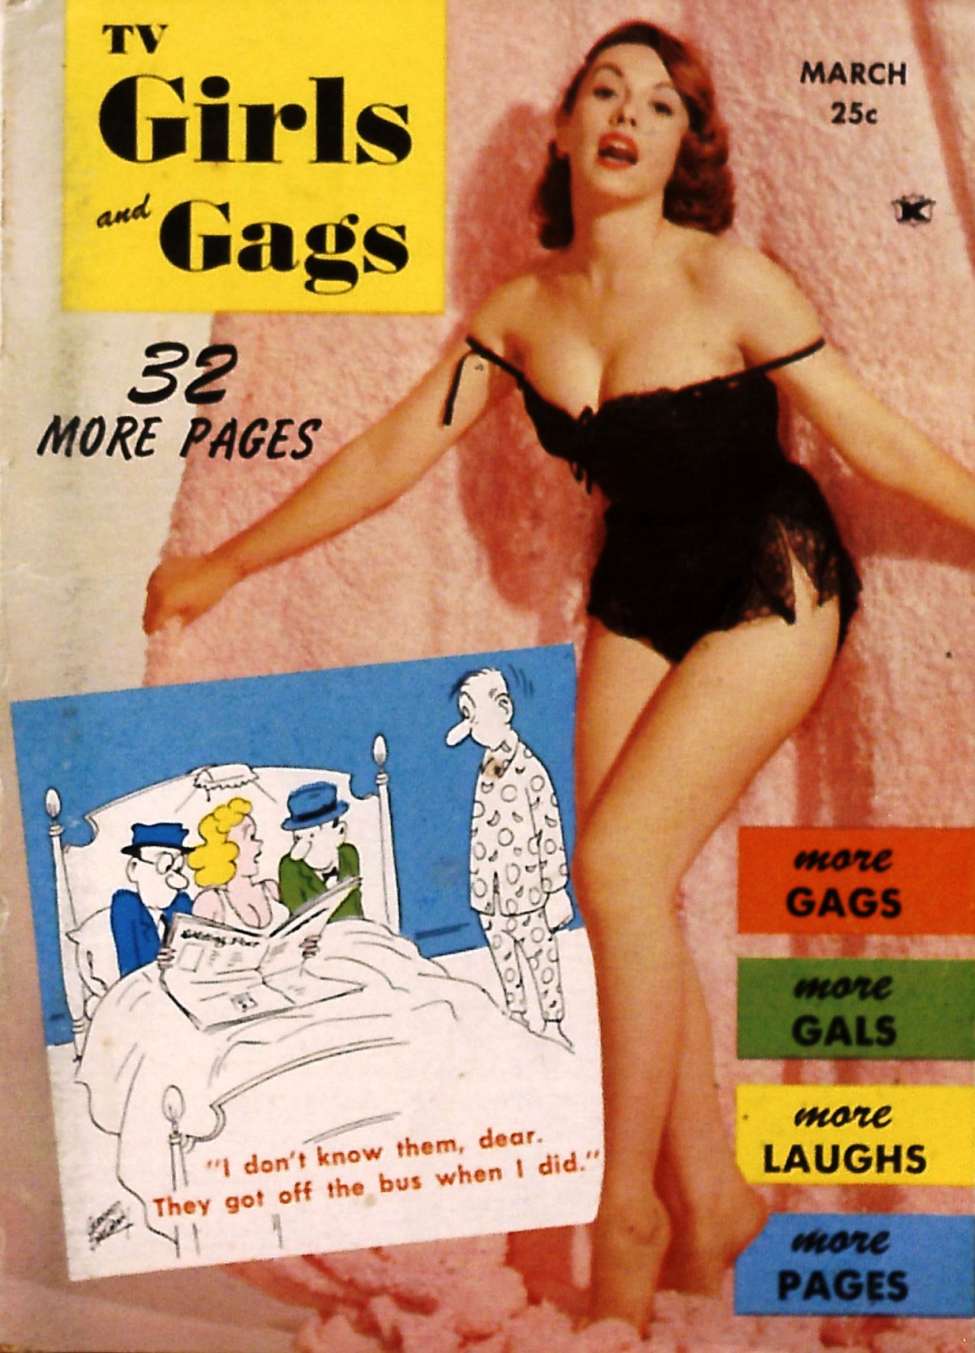 Book Cover For TV Girls and Gags v6 2